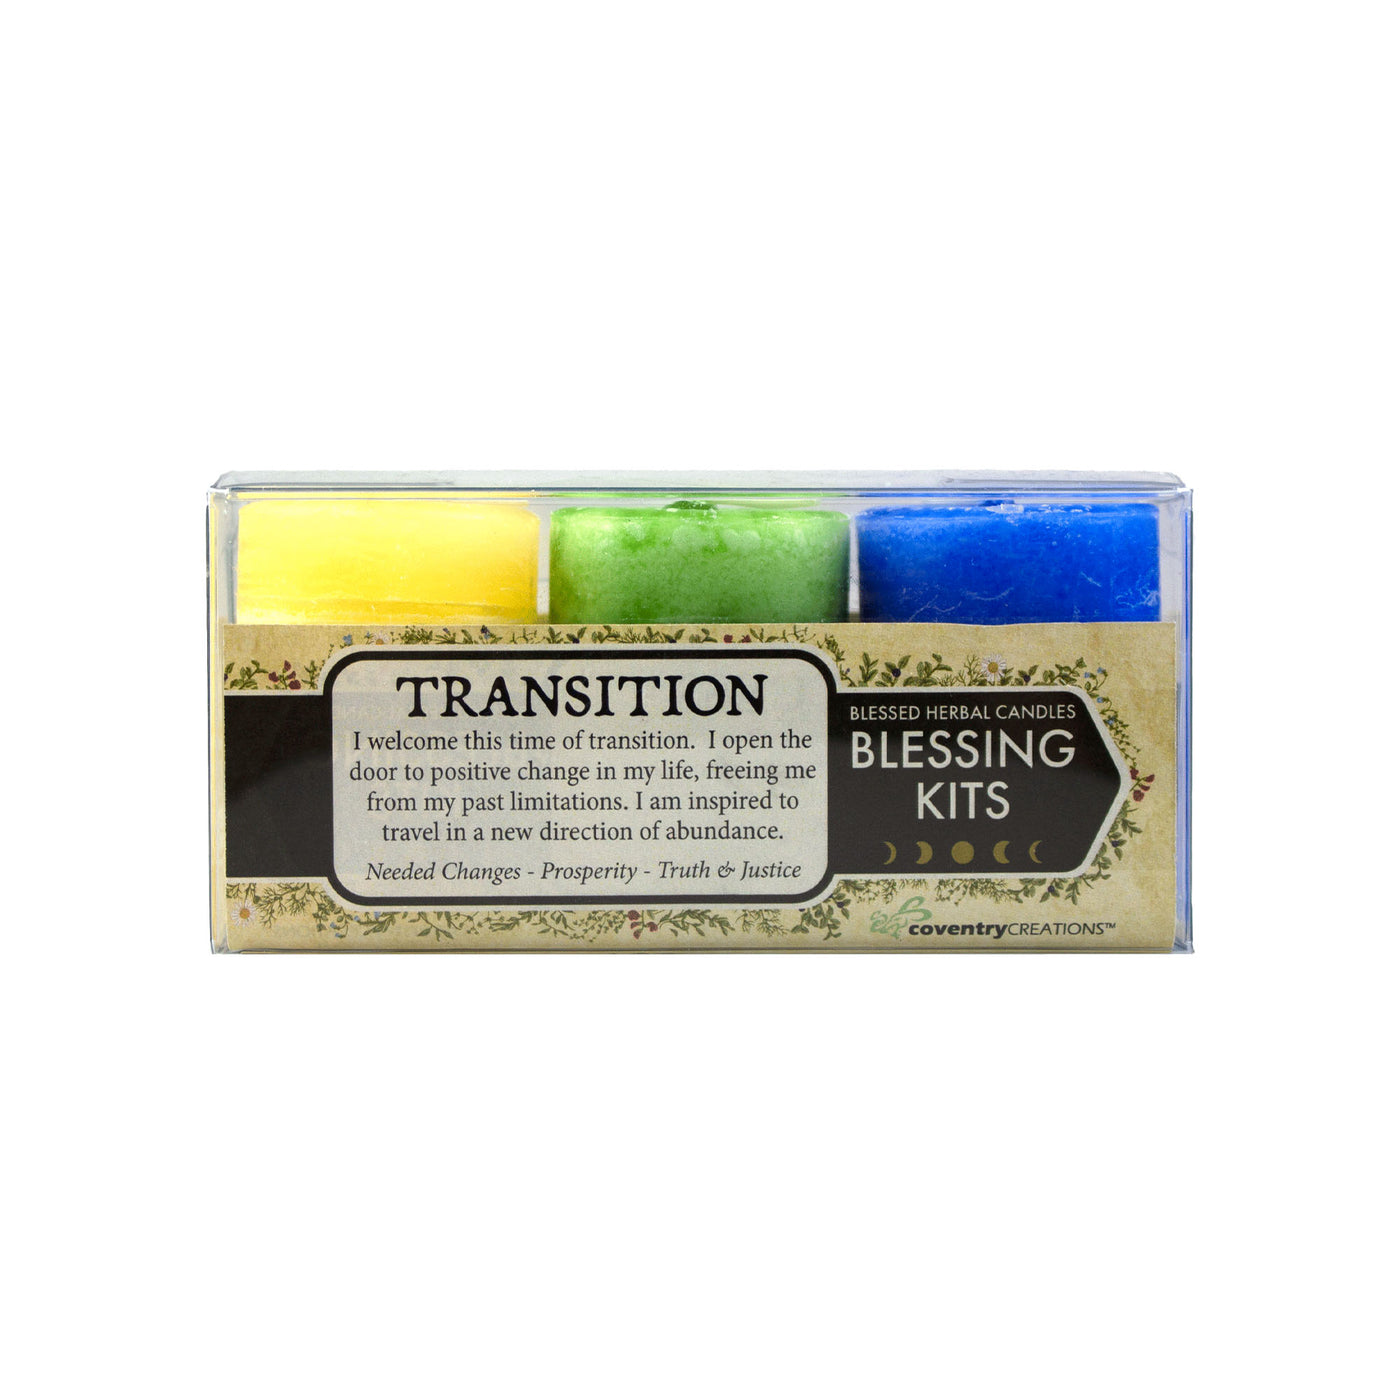 Coventry Creations Transition Blessing Kit. Yellow Needed Change Votive, Green Prosperity Votive, and Brilliant Blue Truth & Justice Votive